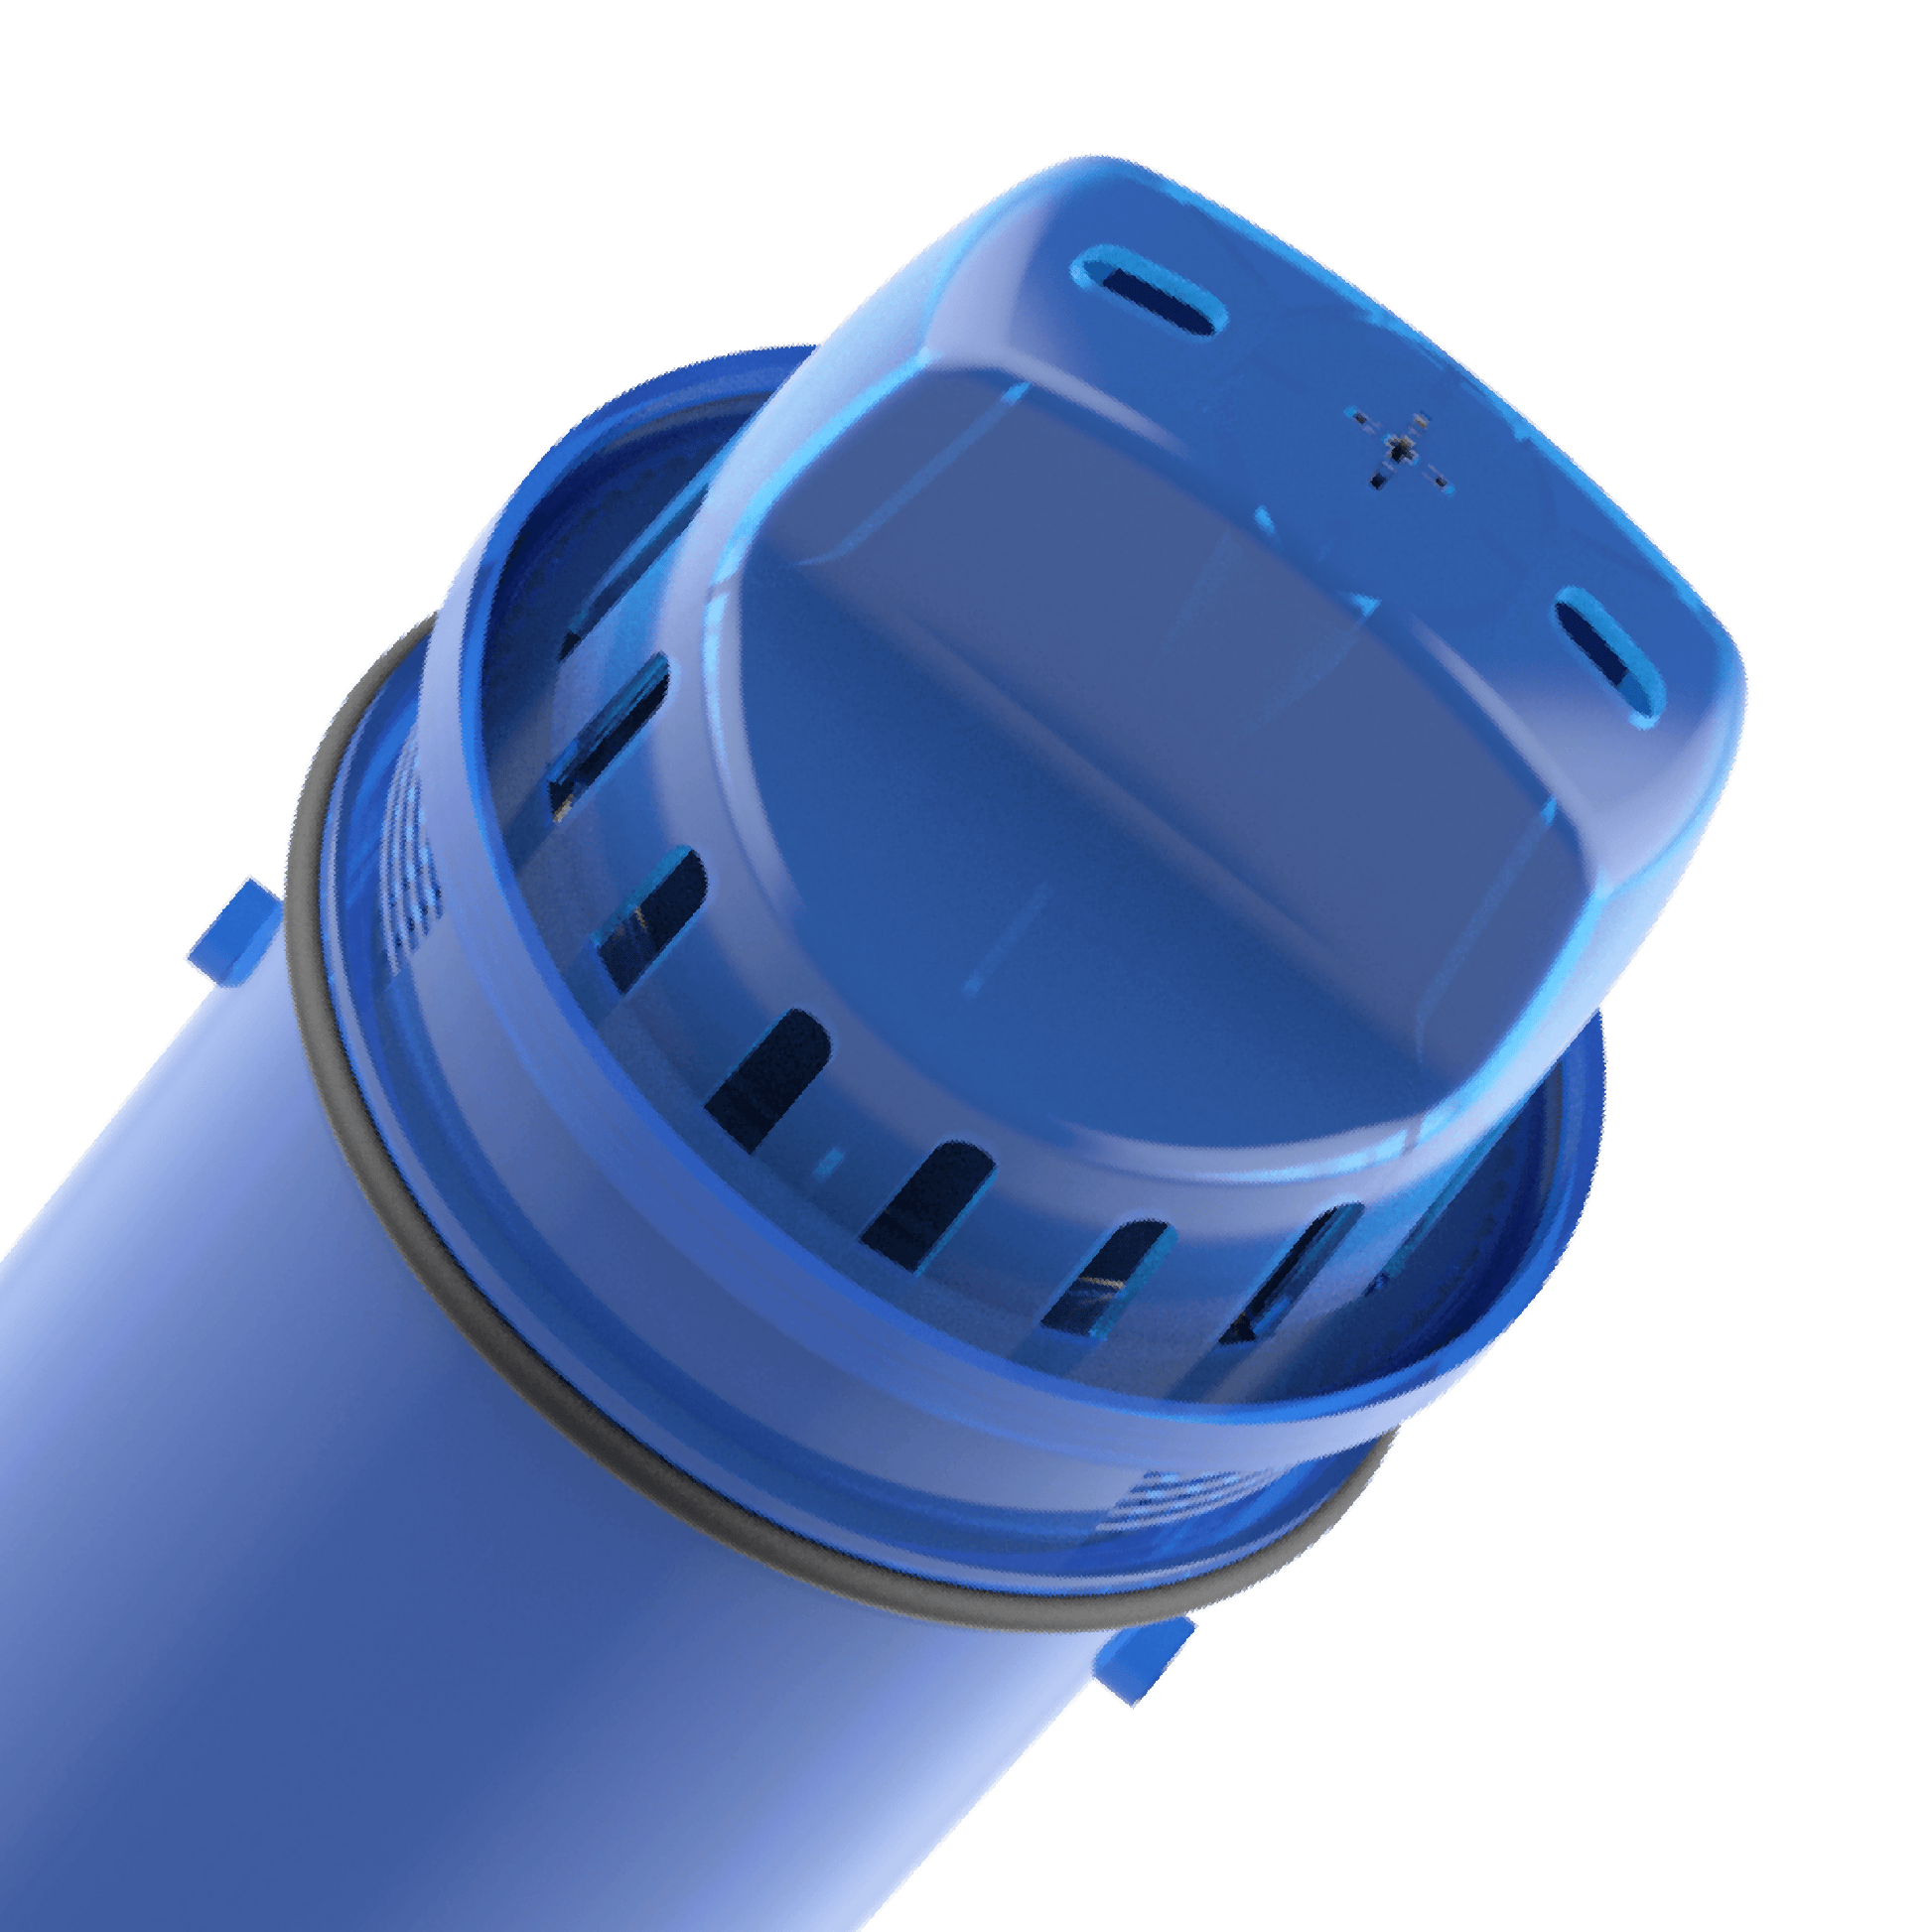 Waterdrop Replacement Filters for Pur Pitchers and Dispensers | Pitcher Water Filter CRF-950Z